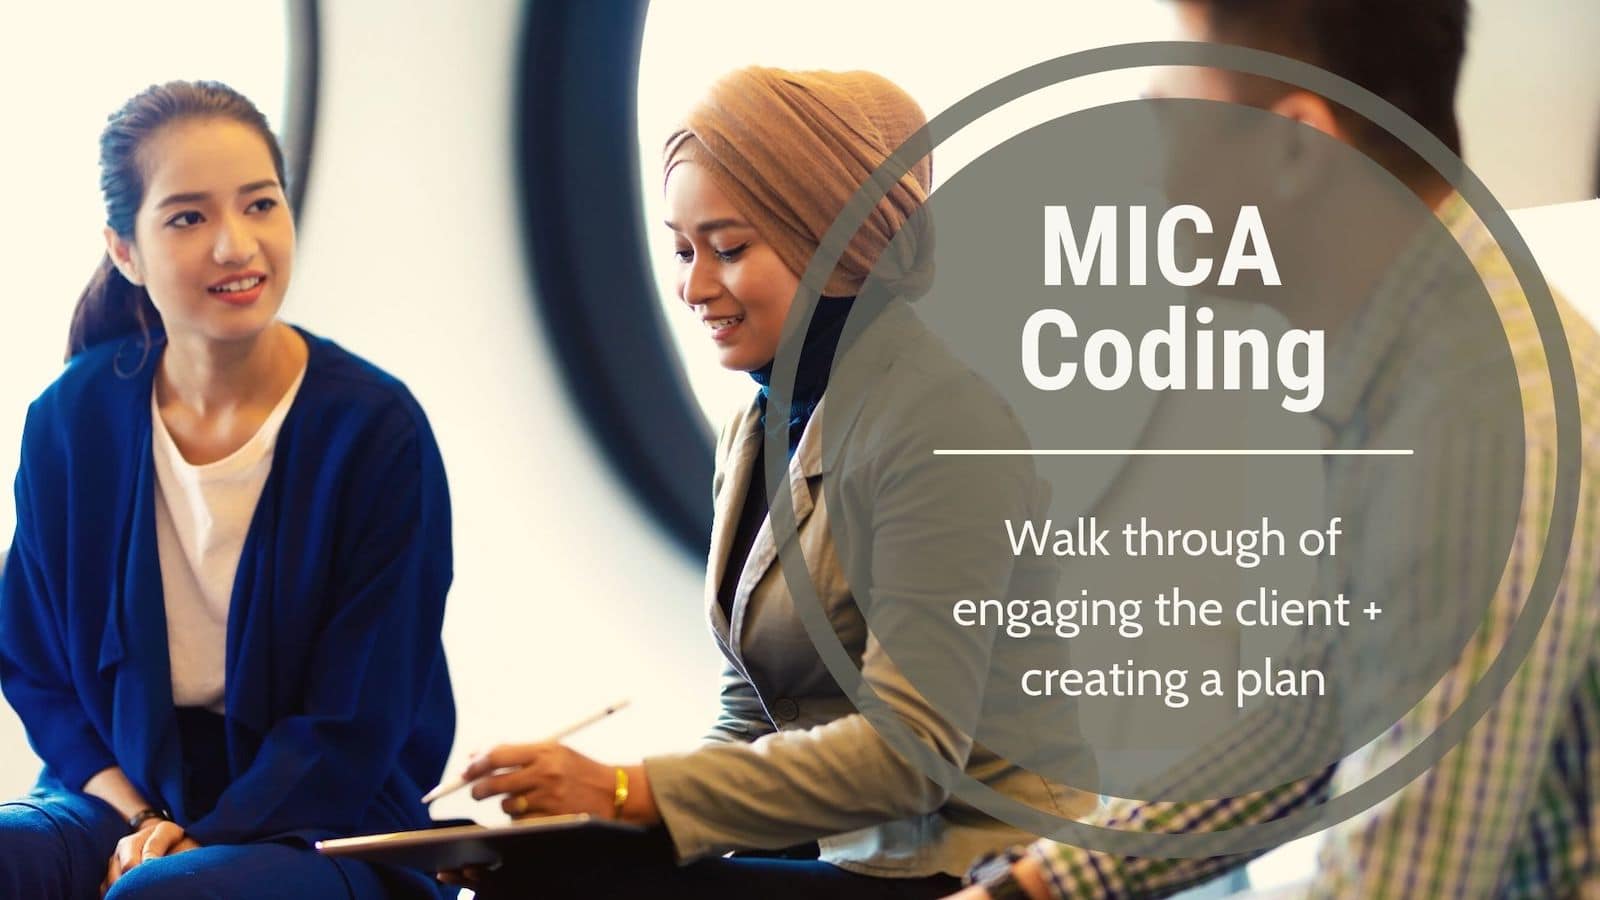 Gold: MICA Coding with John: DVR #5